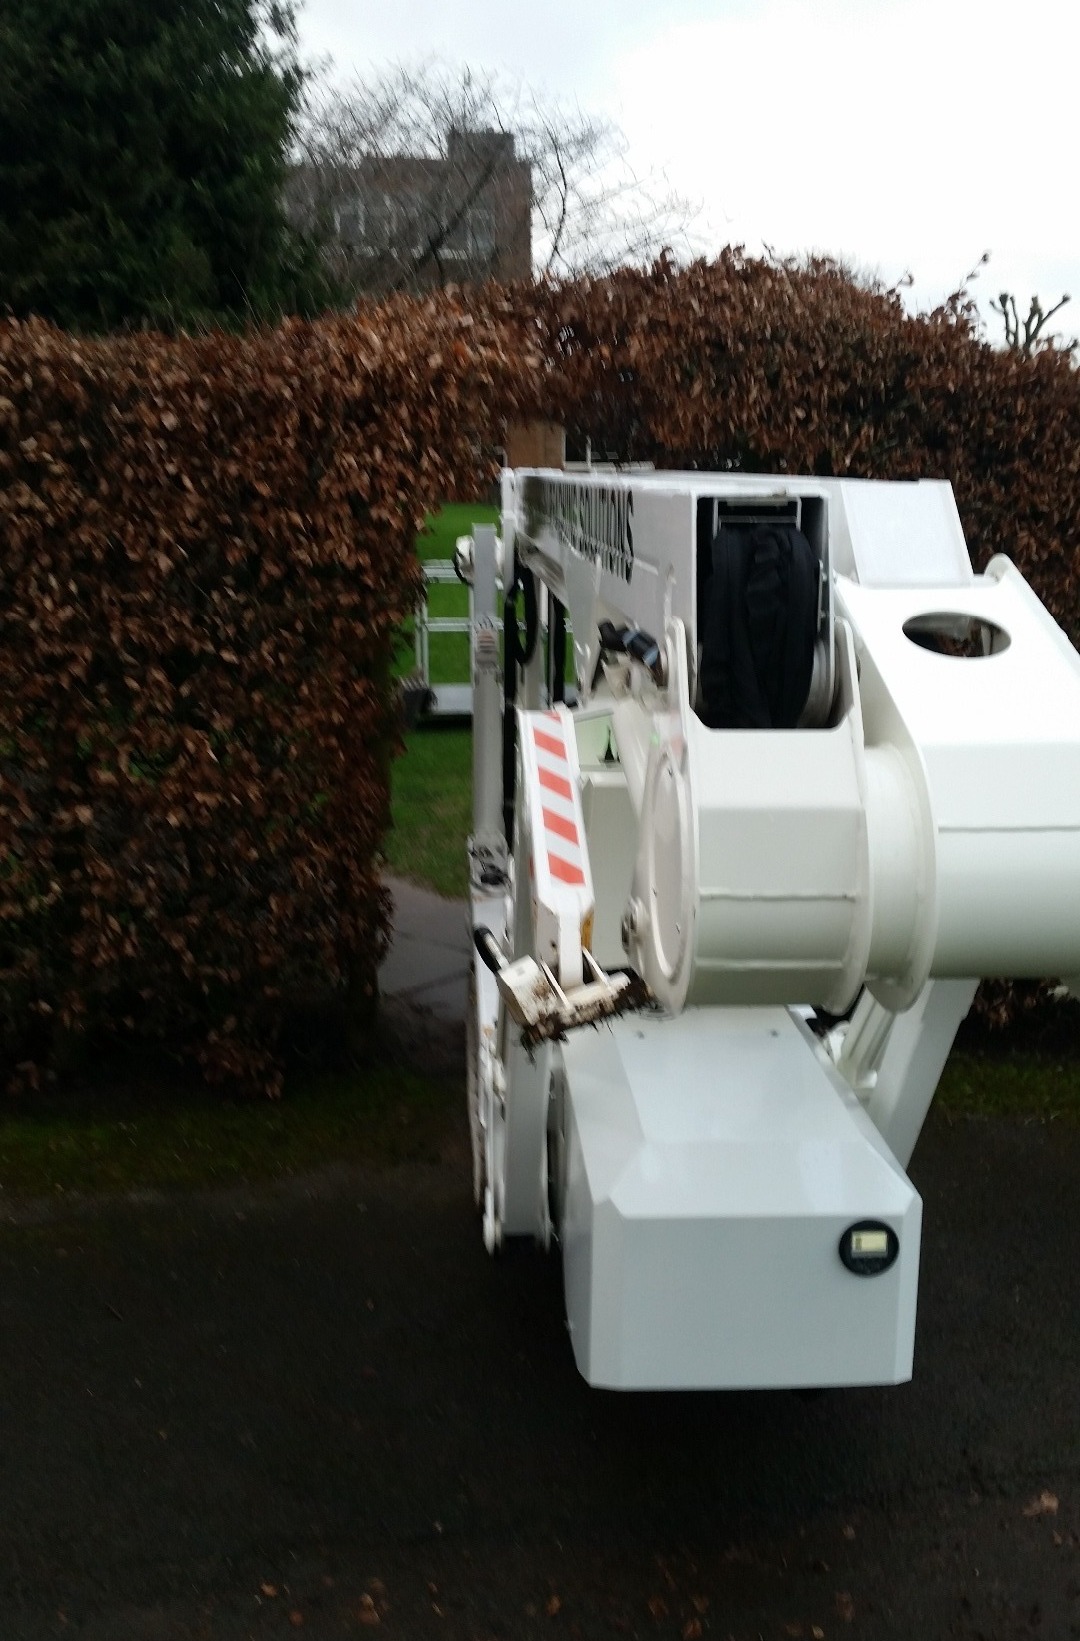 Selina tracked spider cherrypicker going through an archway in a large hedge.